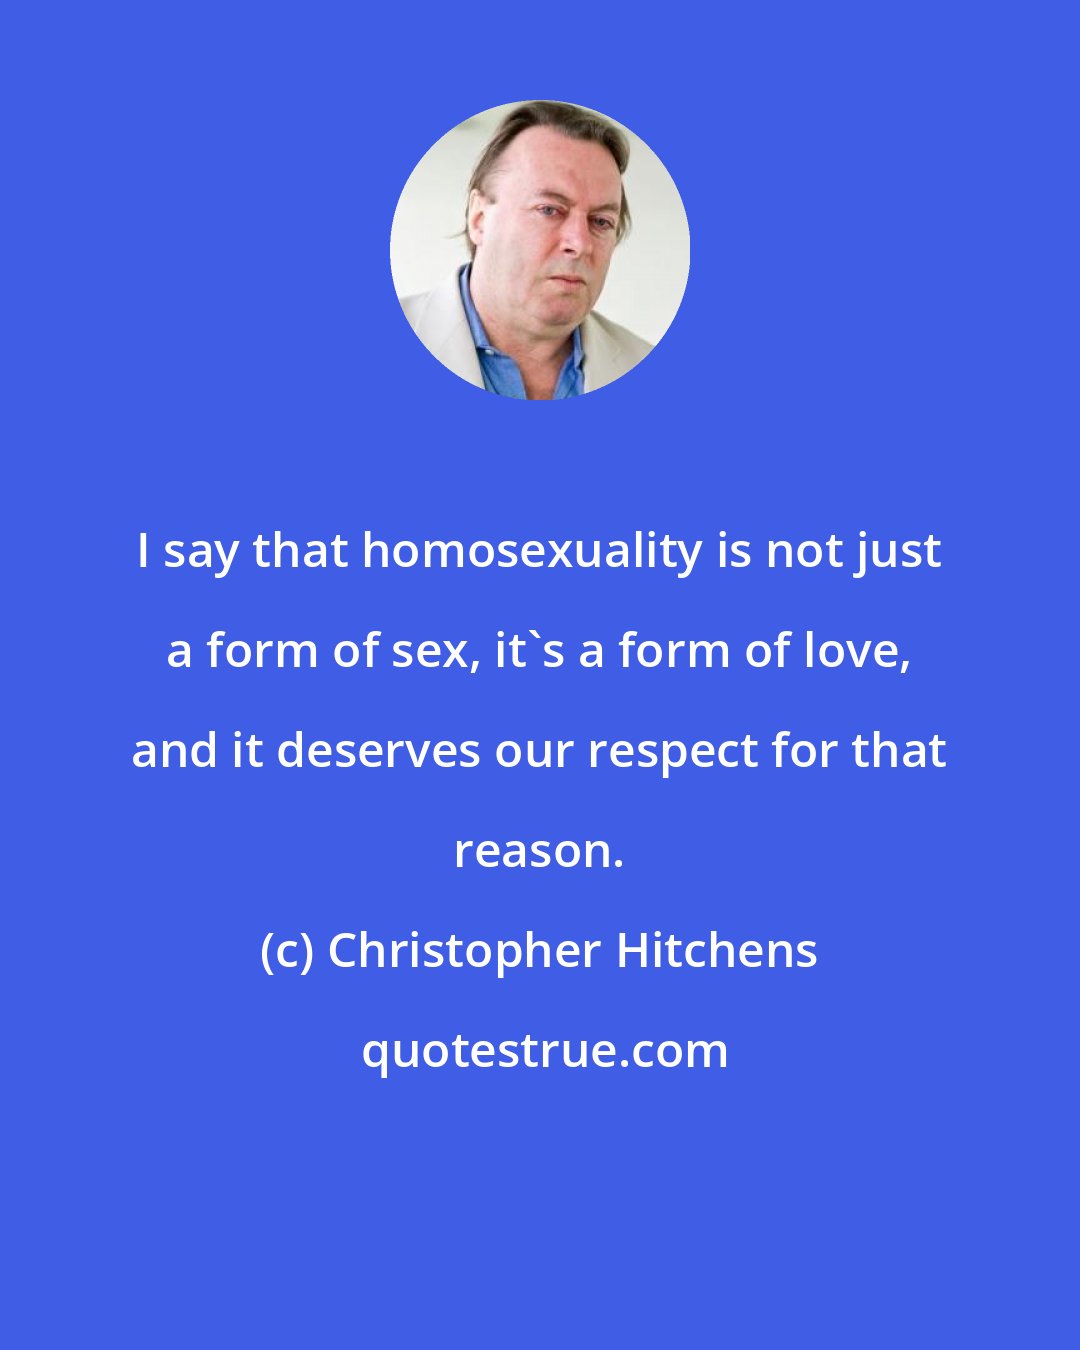 Christopher Hitchens: I say that homosexuality is not just a form of sex, it's a form of love, and it deserves our respect for that reason.